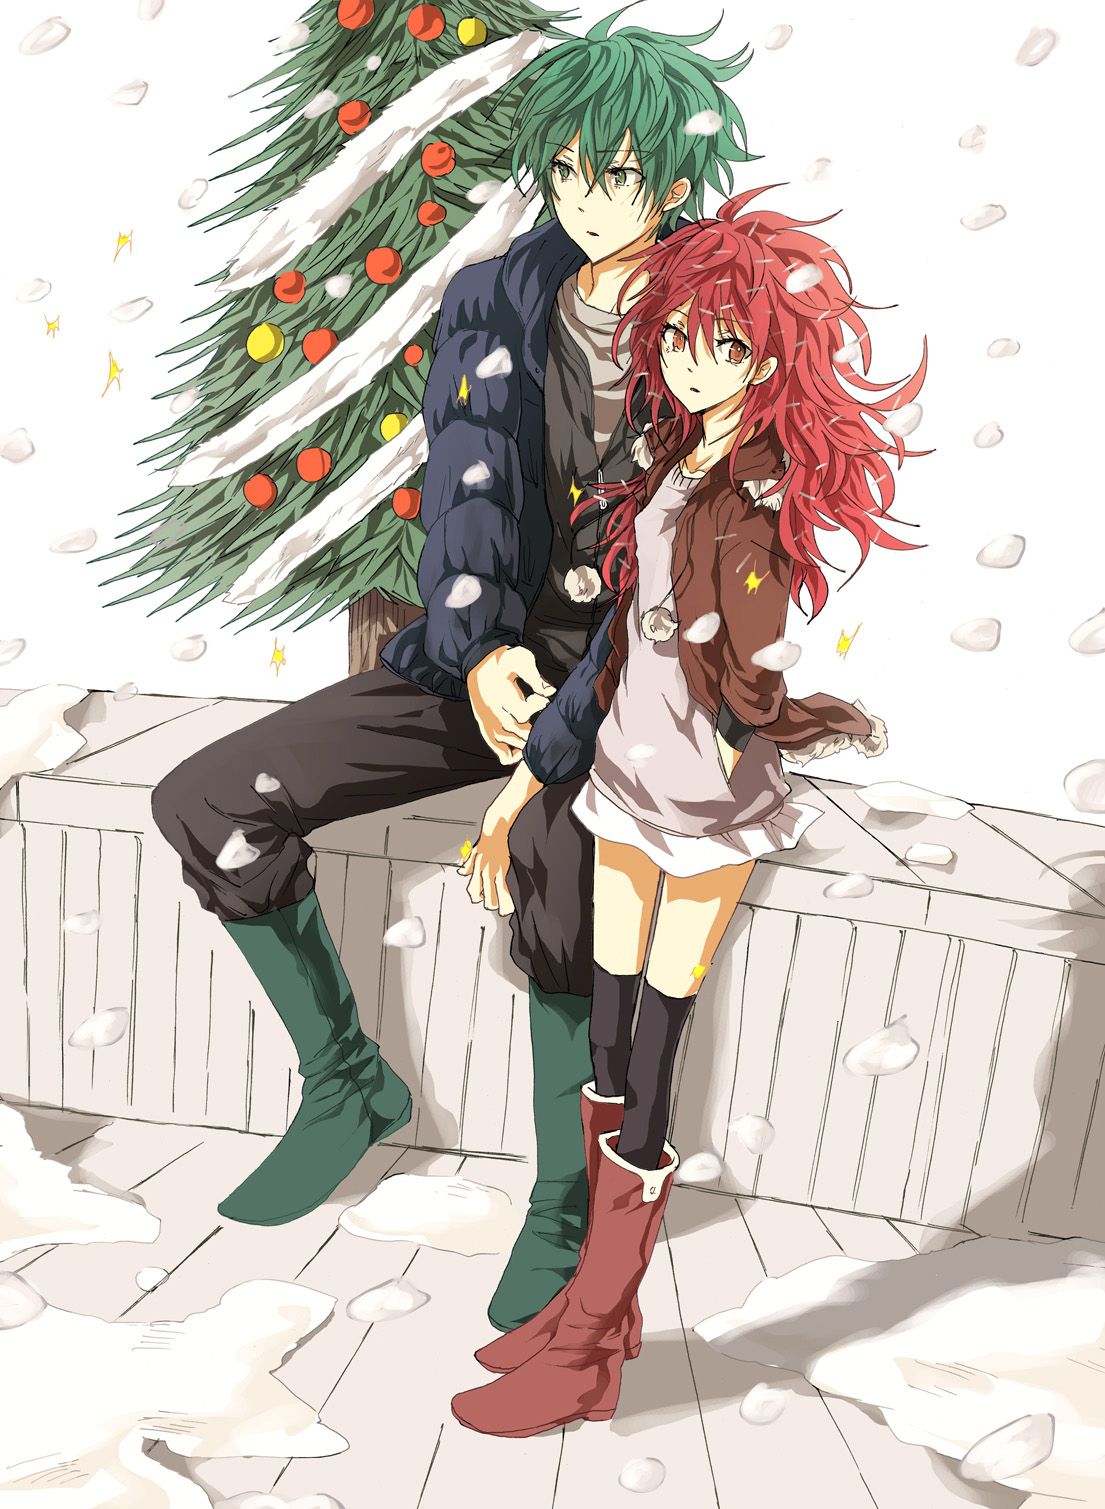 Anime Xmas Couples Wallpapers - Wallpaper Cave